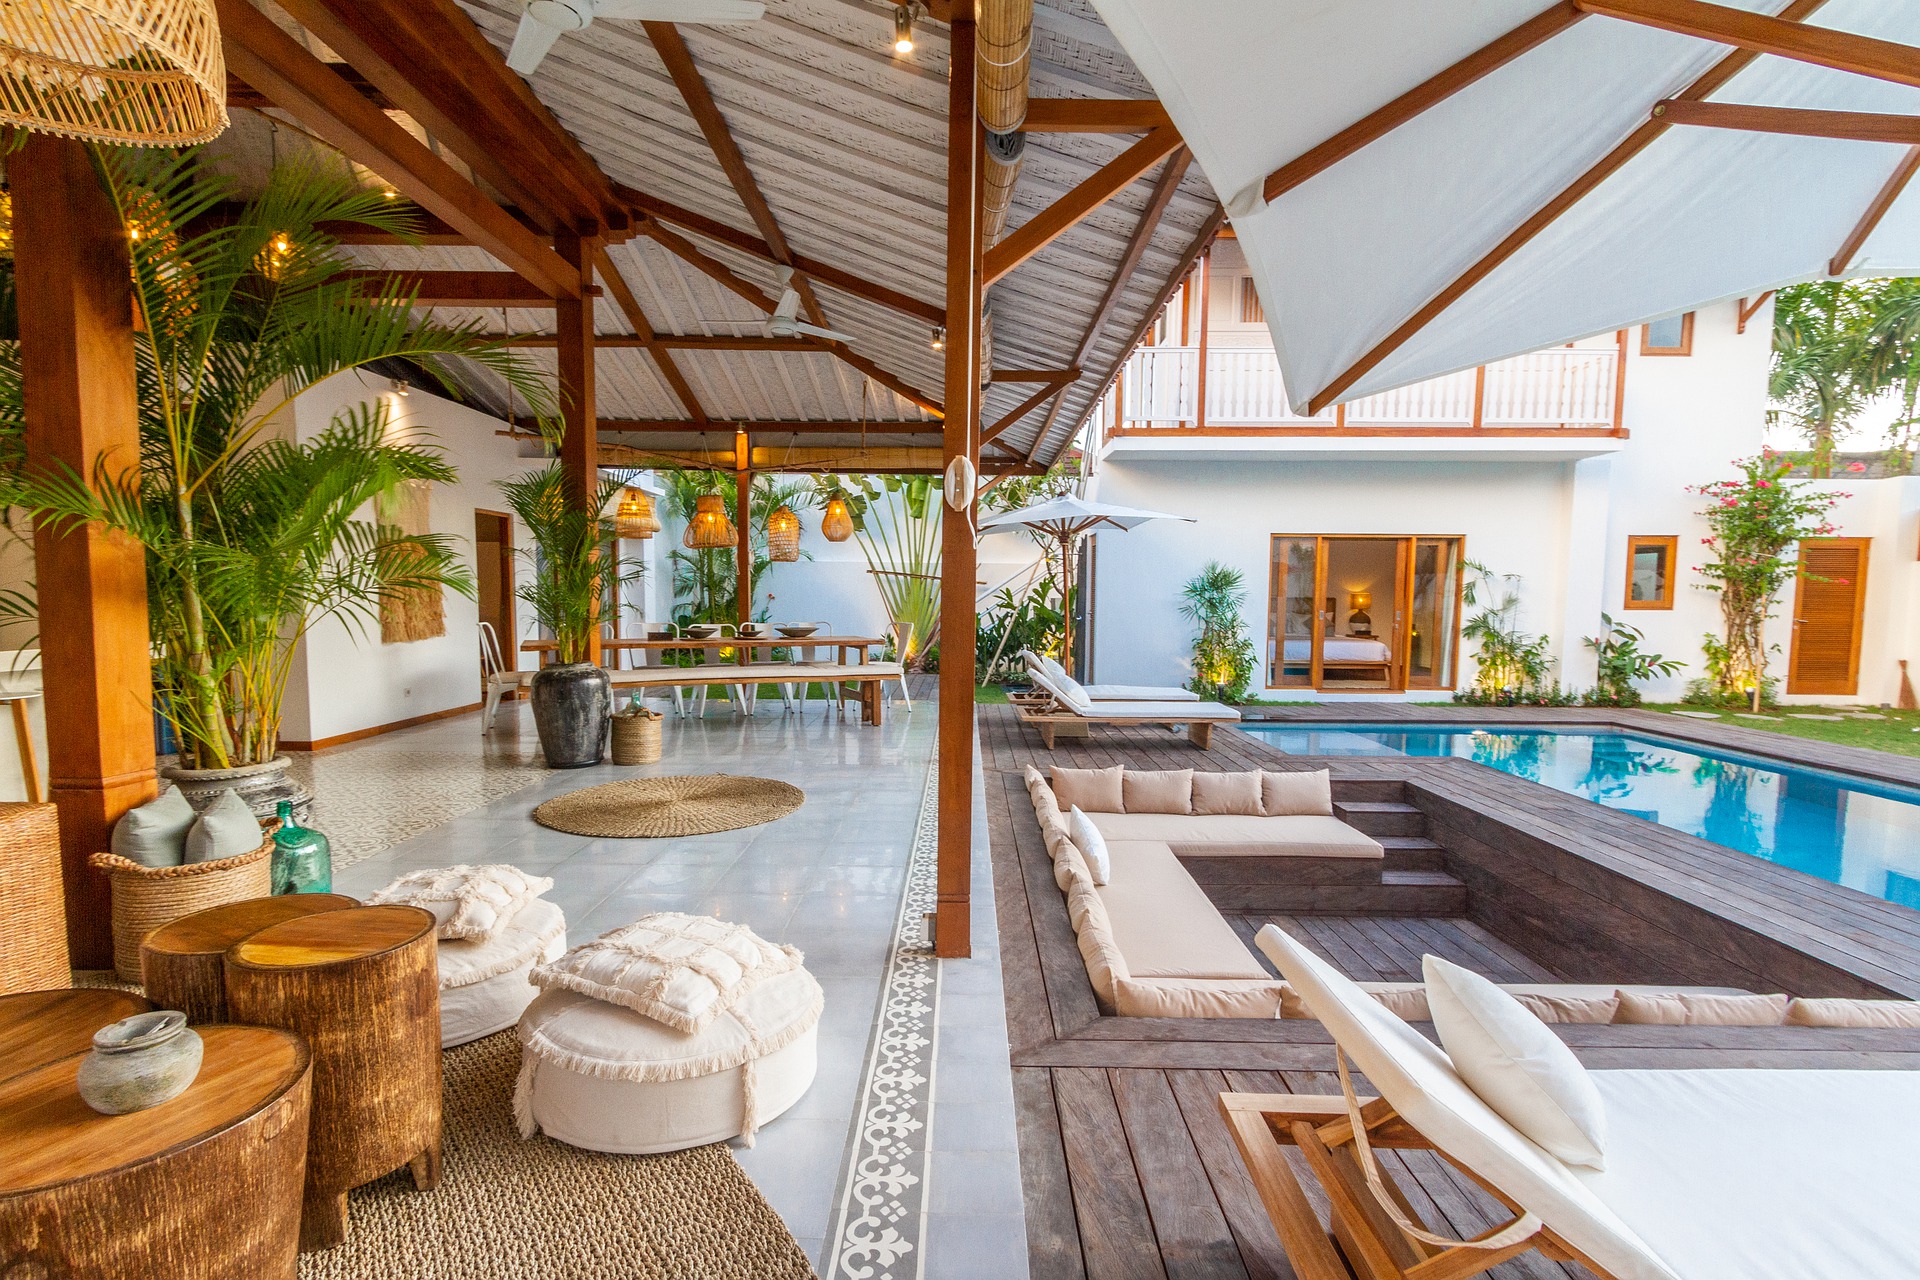 3 Must-Haves for Vacation Rental Properties in the Caribbean